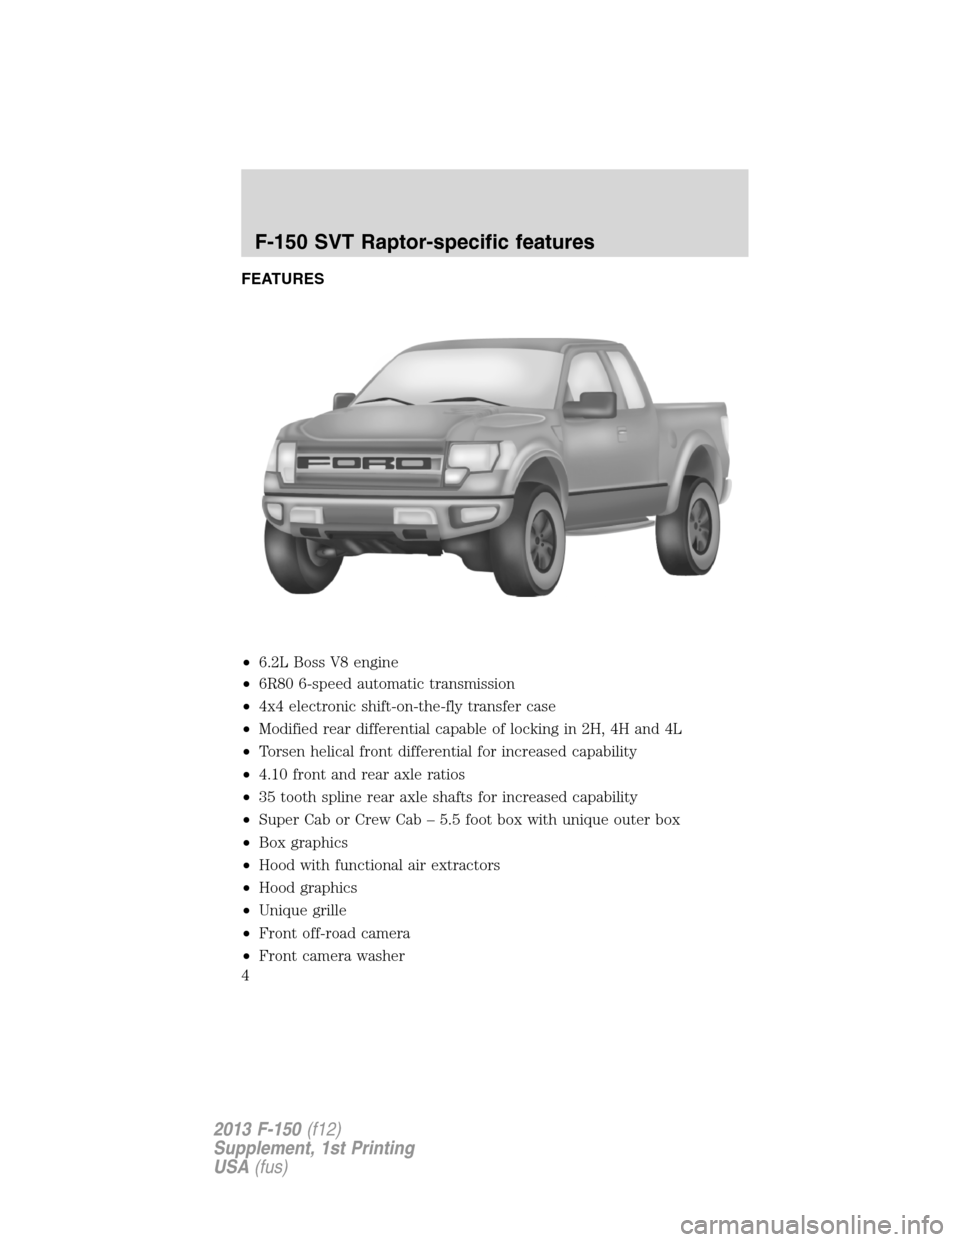 FORD F150 2013 12.G Raptor Supplement Manual FEATURES
•6.2L Boss V8 engine
•6R80 6-speed automatic transmission
•4x4 electronic shift-on-the-fly transfer case
•Modified rear differential capable of locking in 2H, 4H and 4L
•Torsen heli